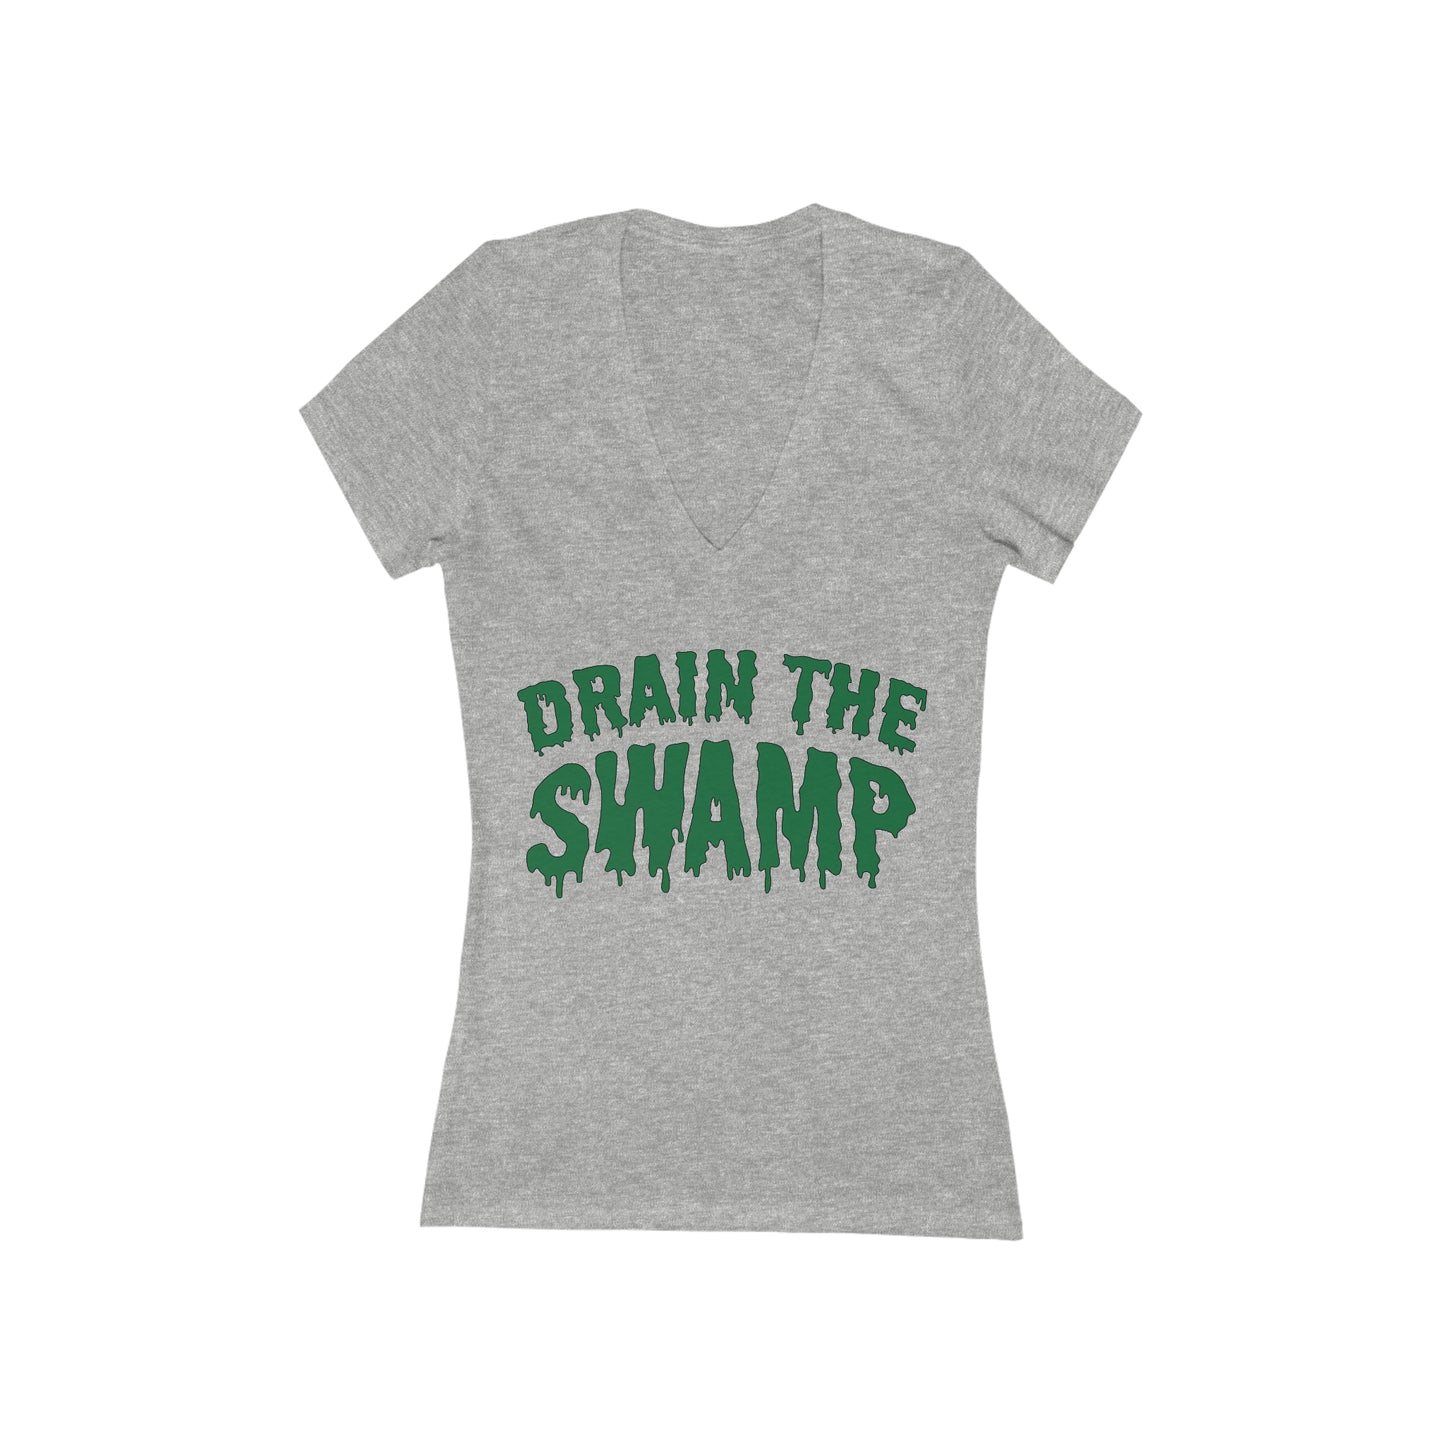 Conservative TShirt For Drain The Swamp T-shirt For Patriot Shirt For Pro Trump T Shirt For American Anti Political Corruption Shirt